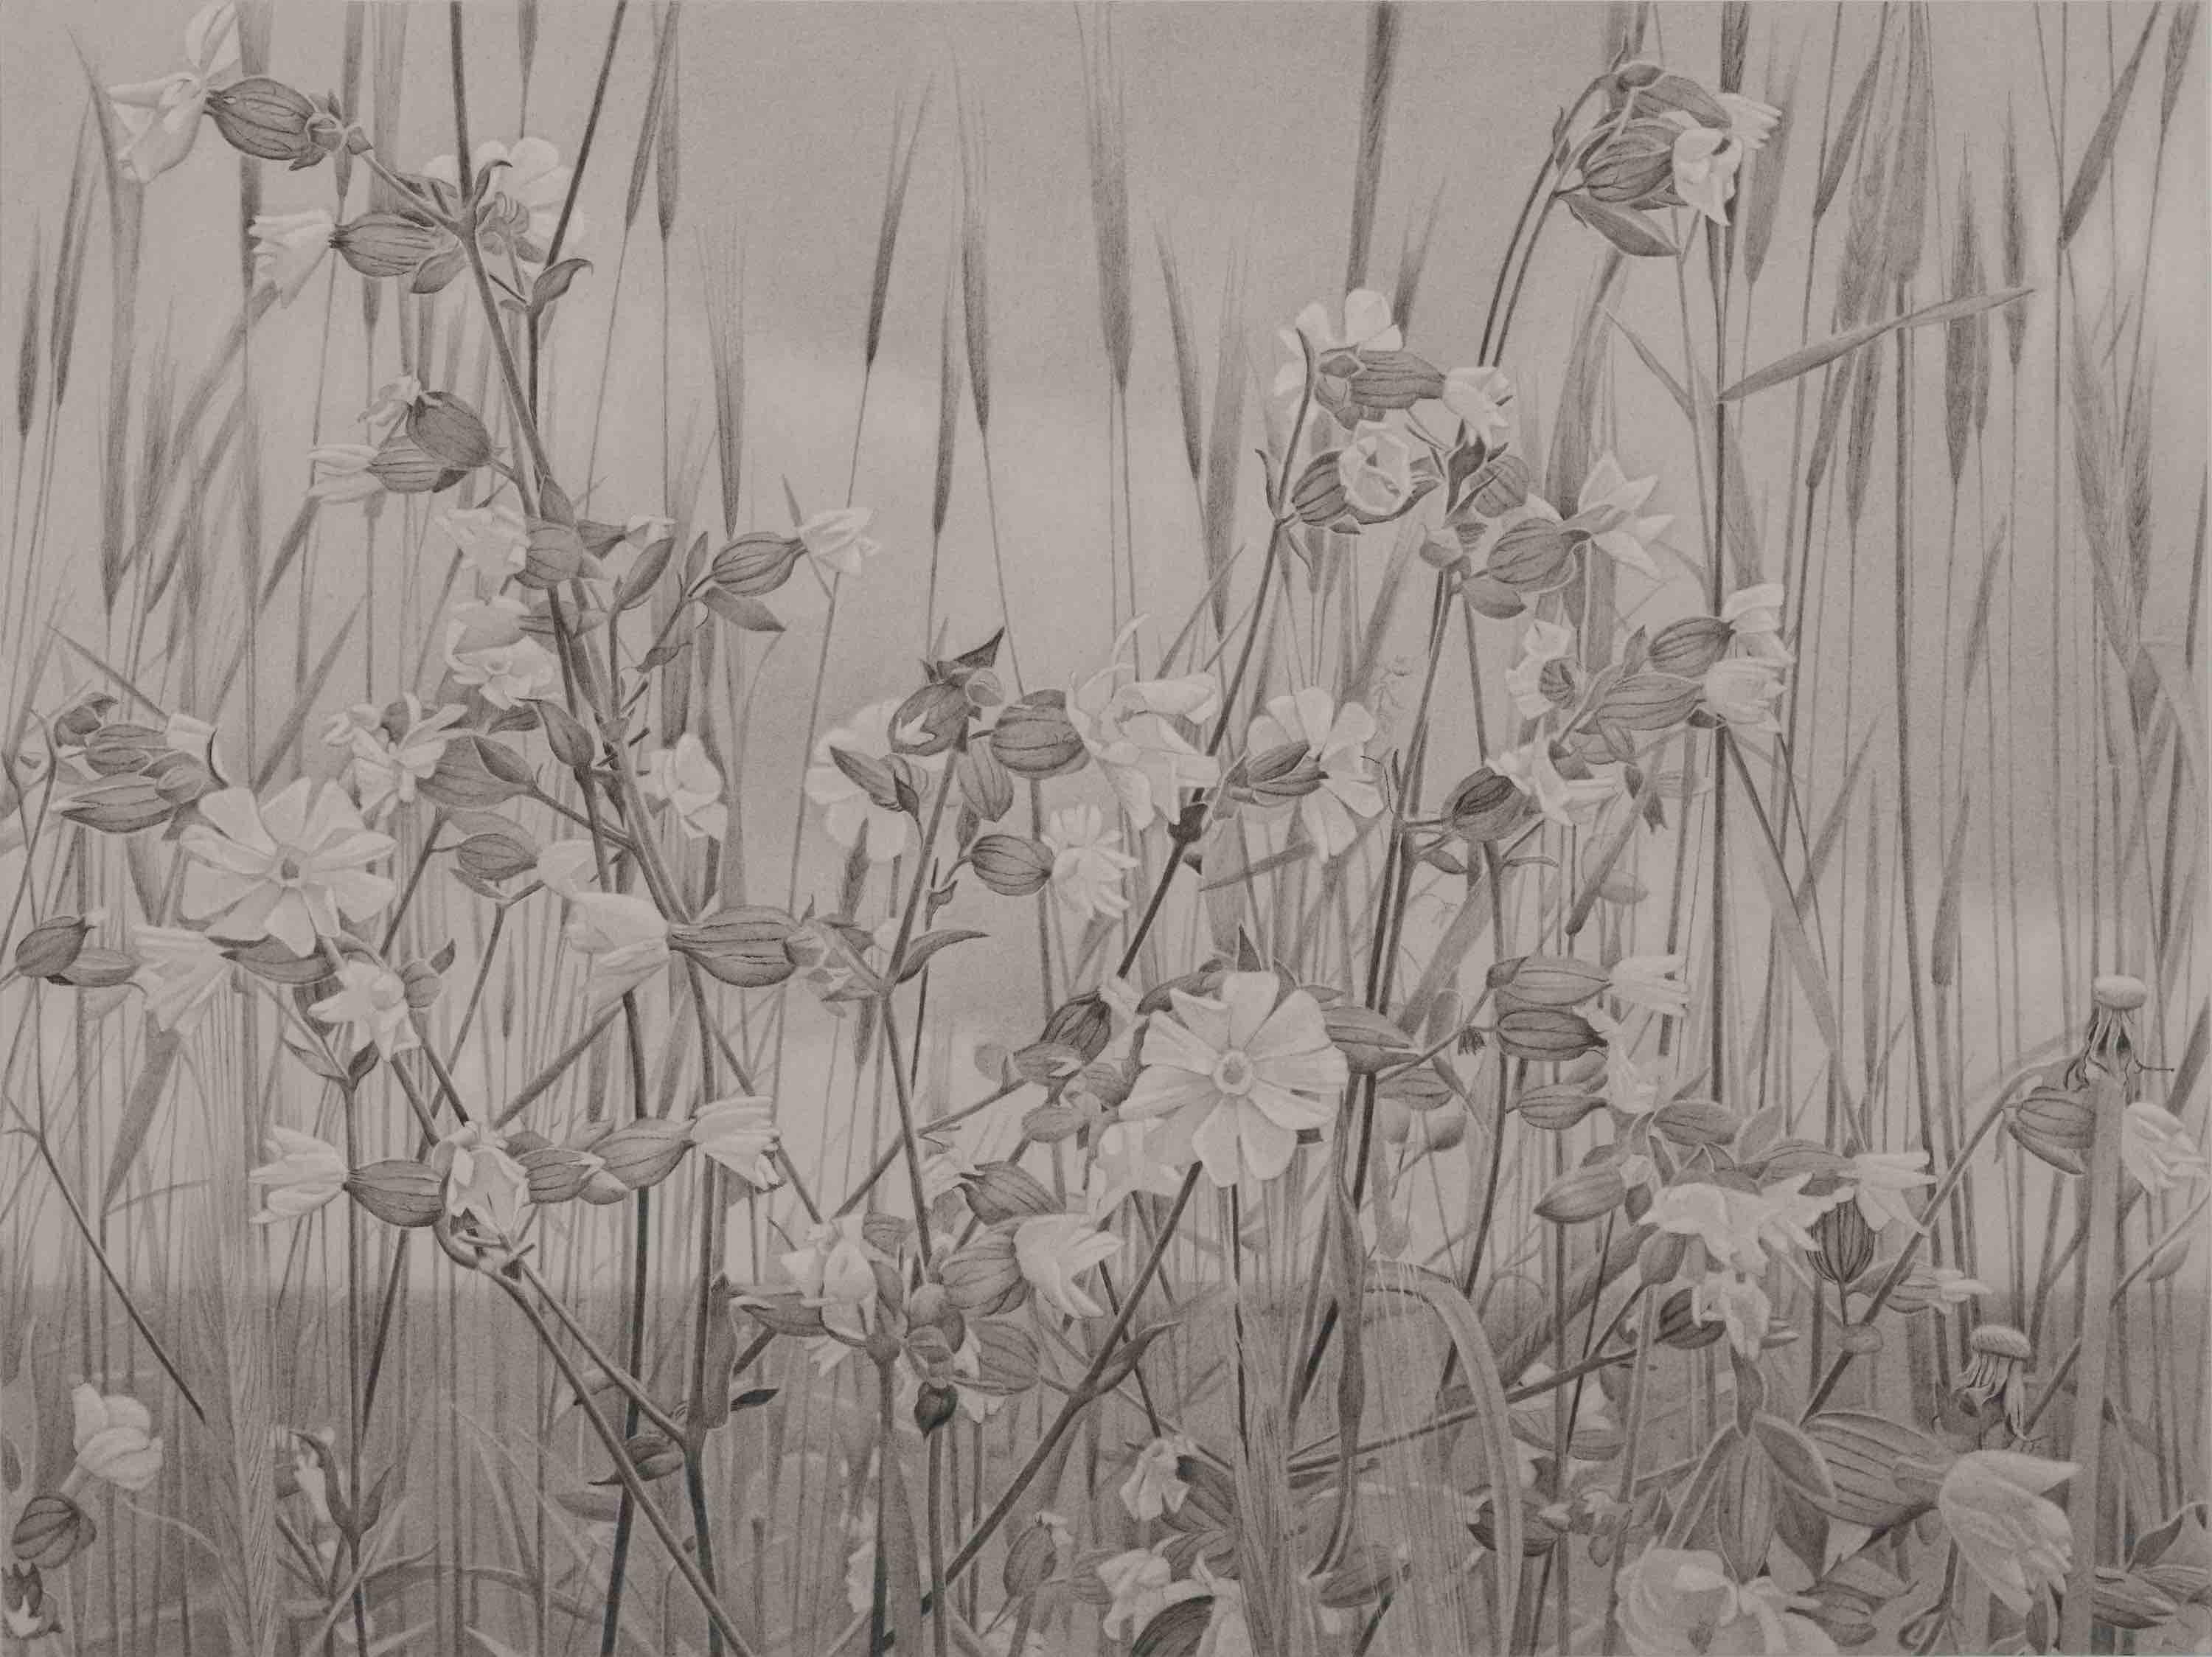 Mary Reilly Landscape Art - Wildflowers and Sky, Vermont Landscape Black & White Graphite Drawing